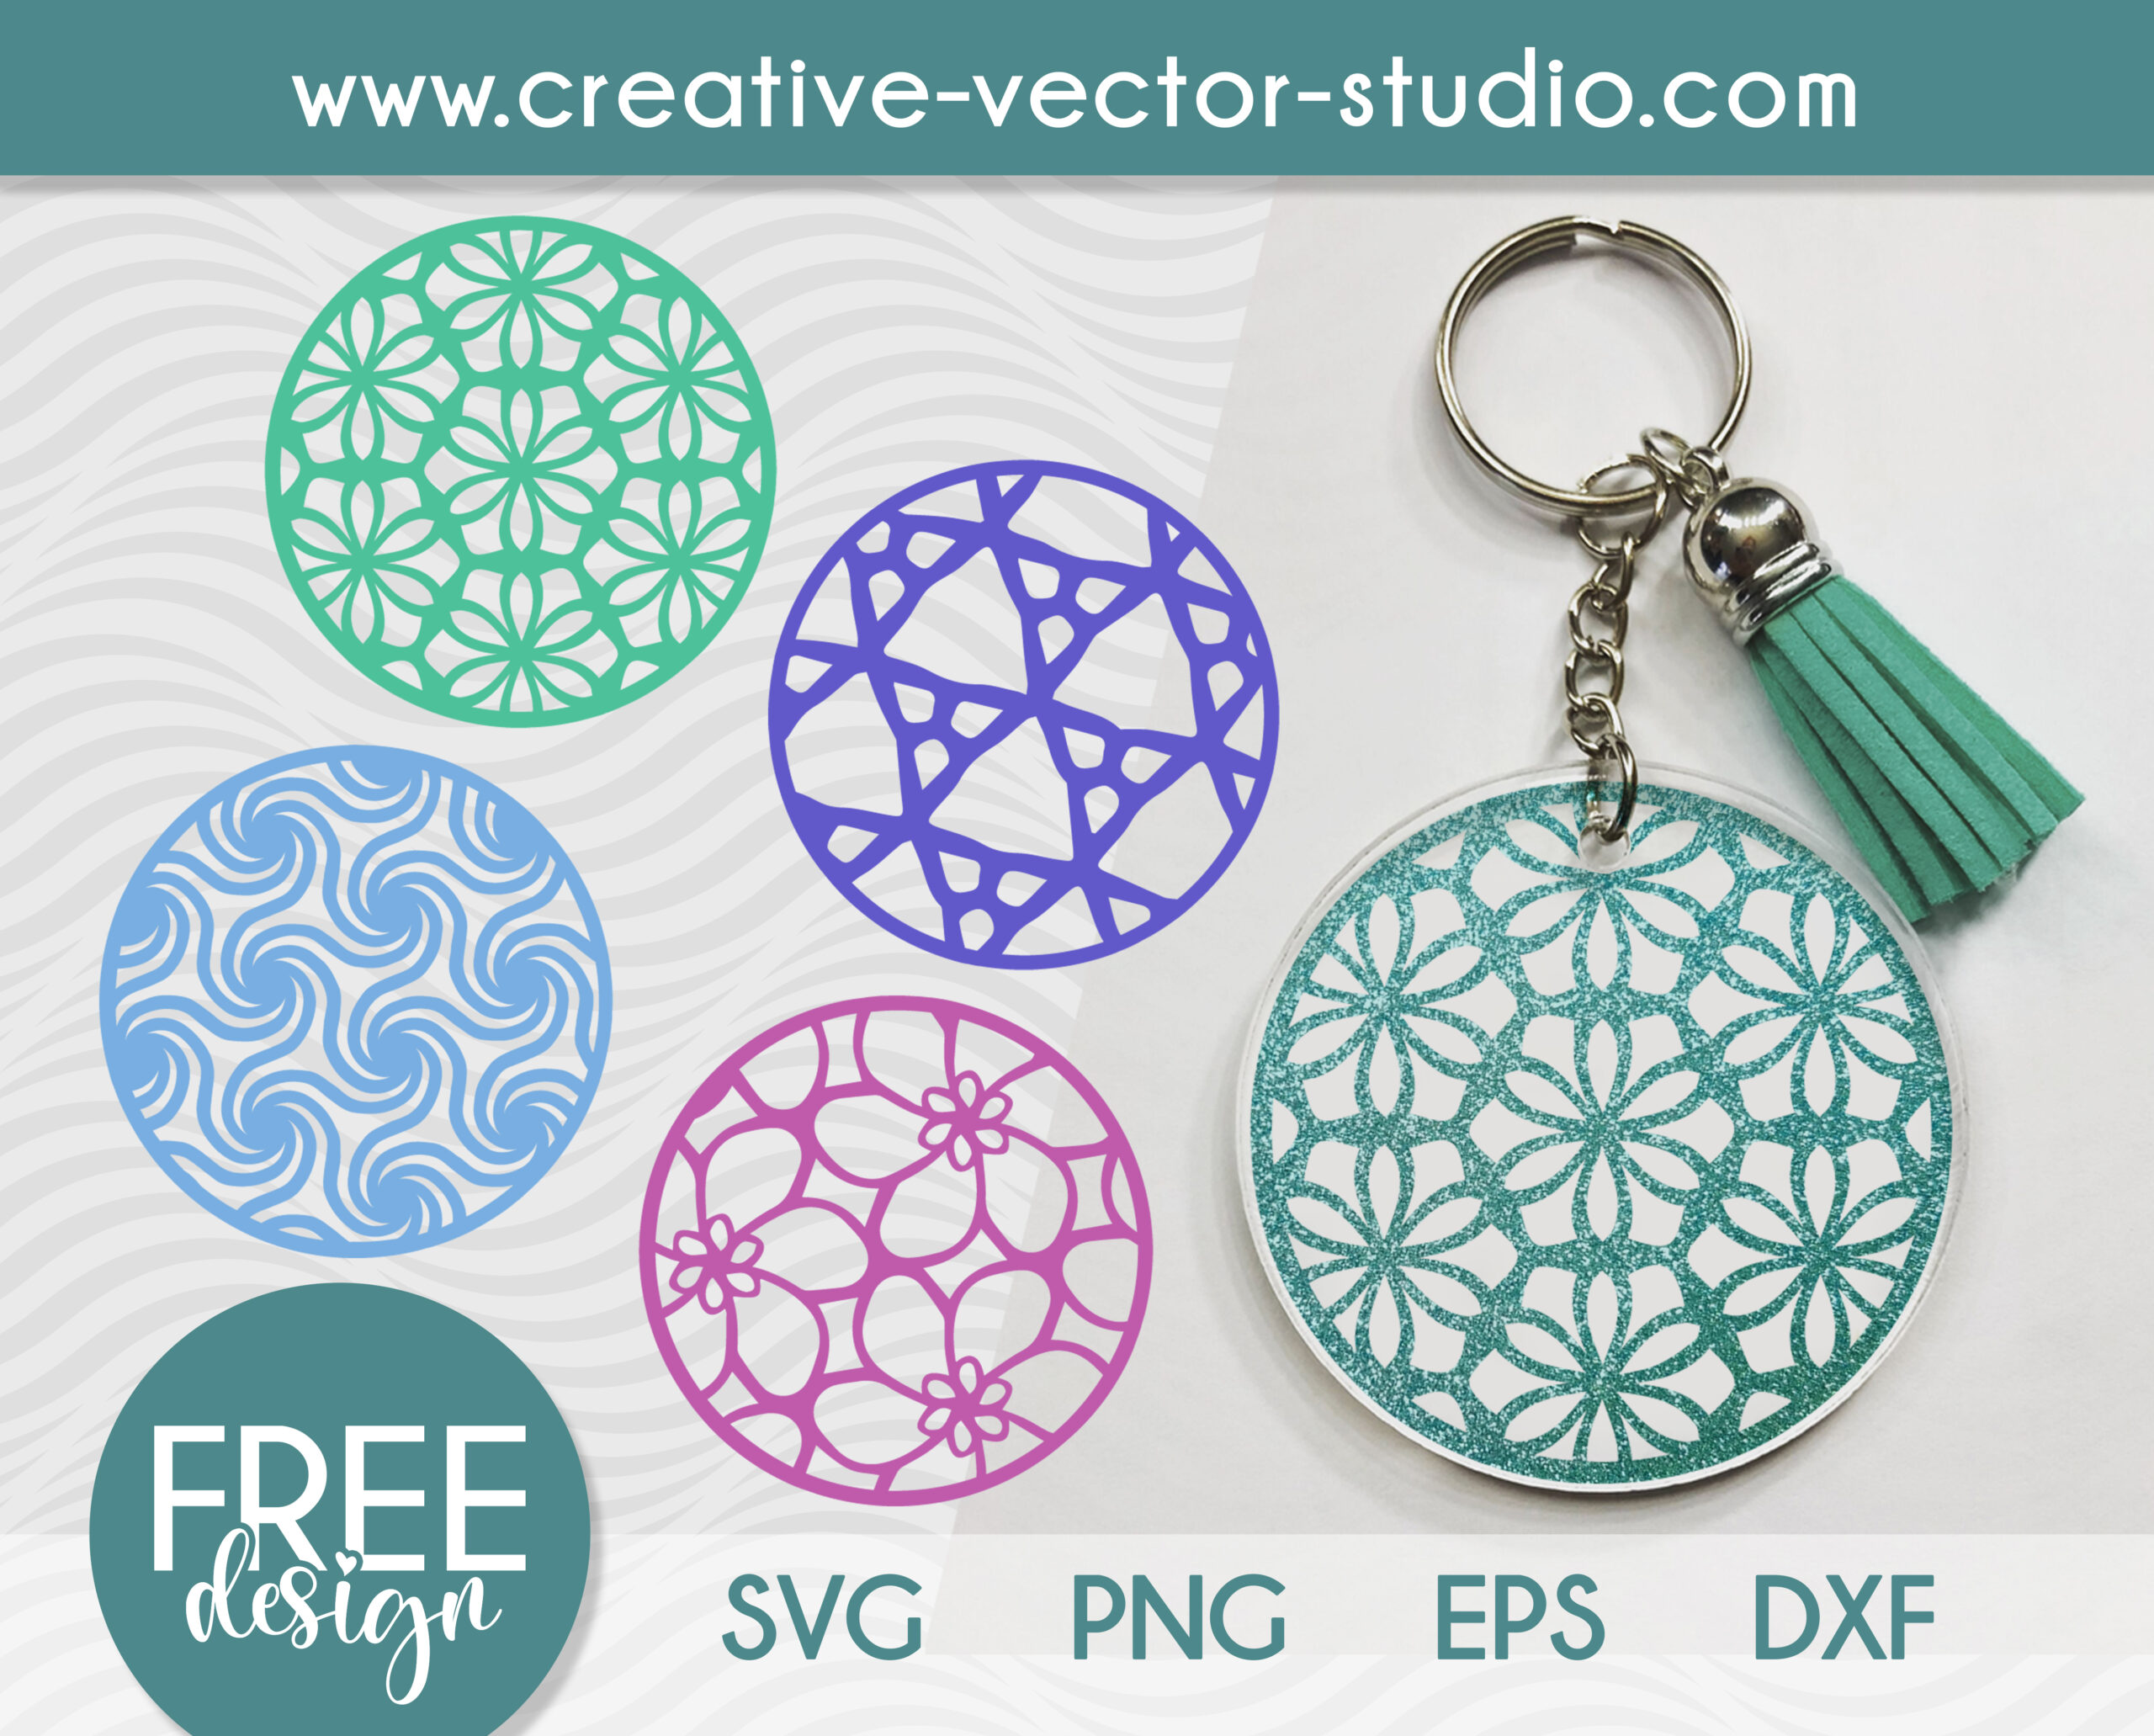 Free Keychain Round Patterns, PNG, DXF, EPS - Creative Vector Studio